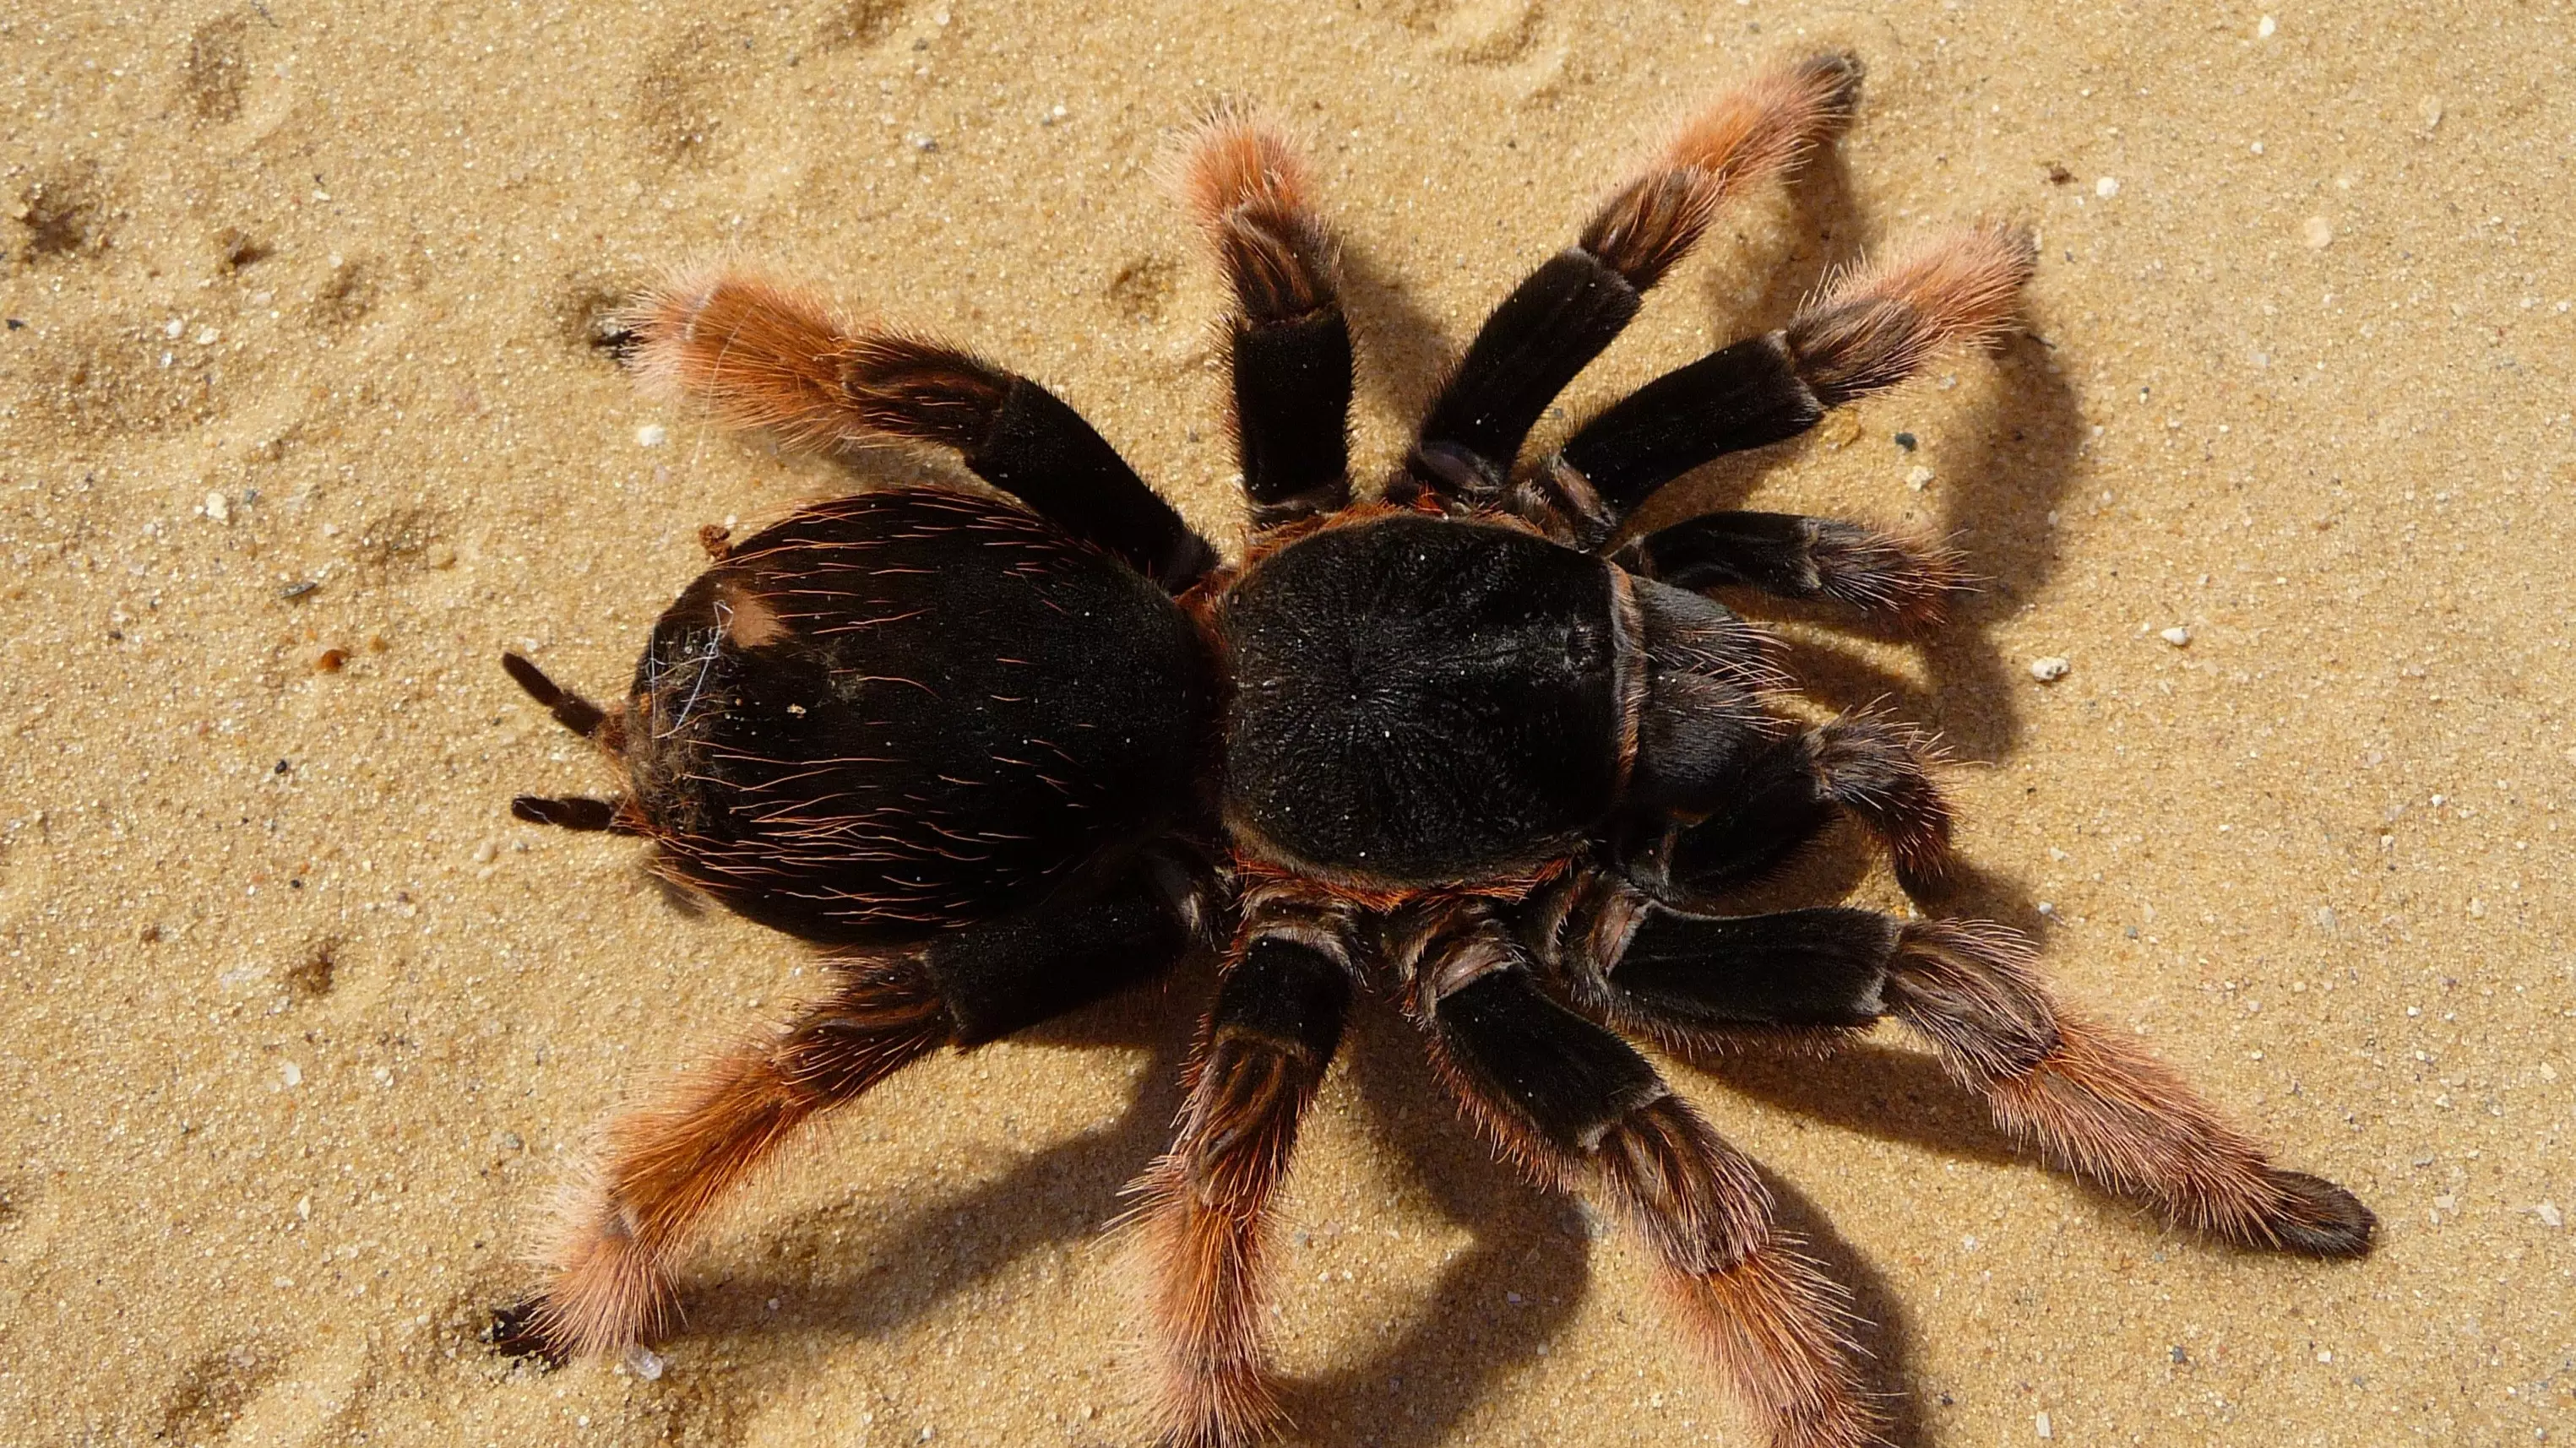 This Video Of A Tarantula Swimming Will Ruin Your Day